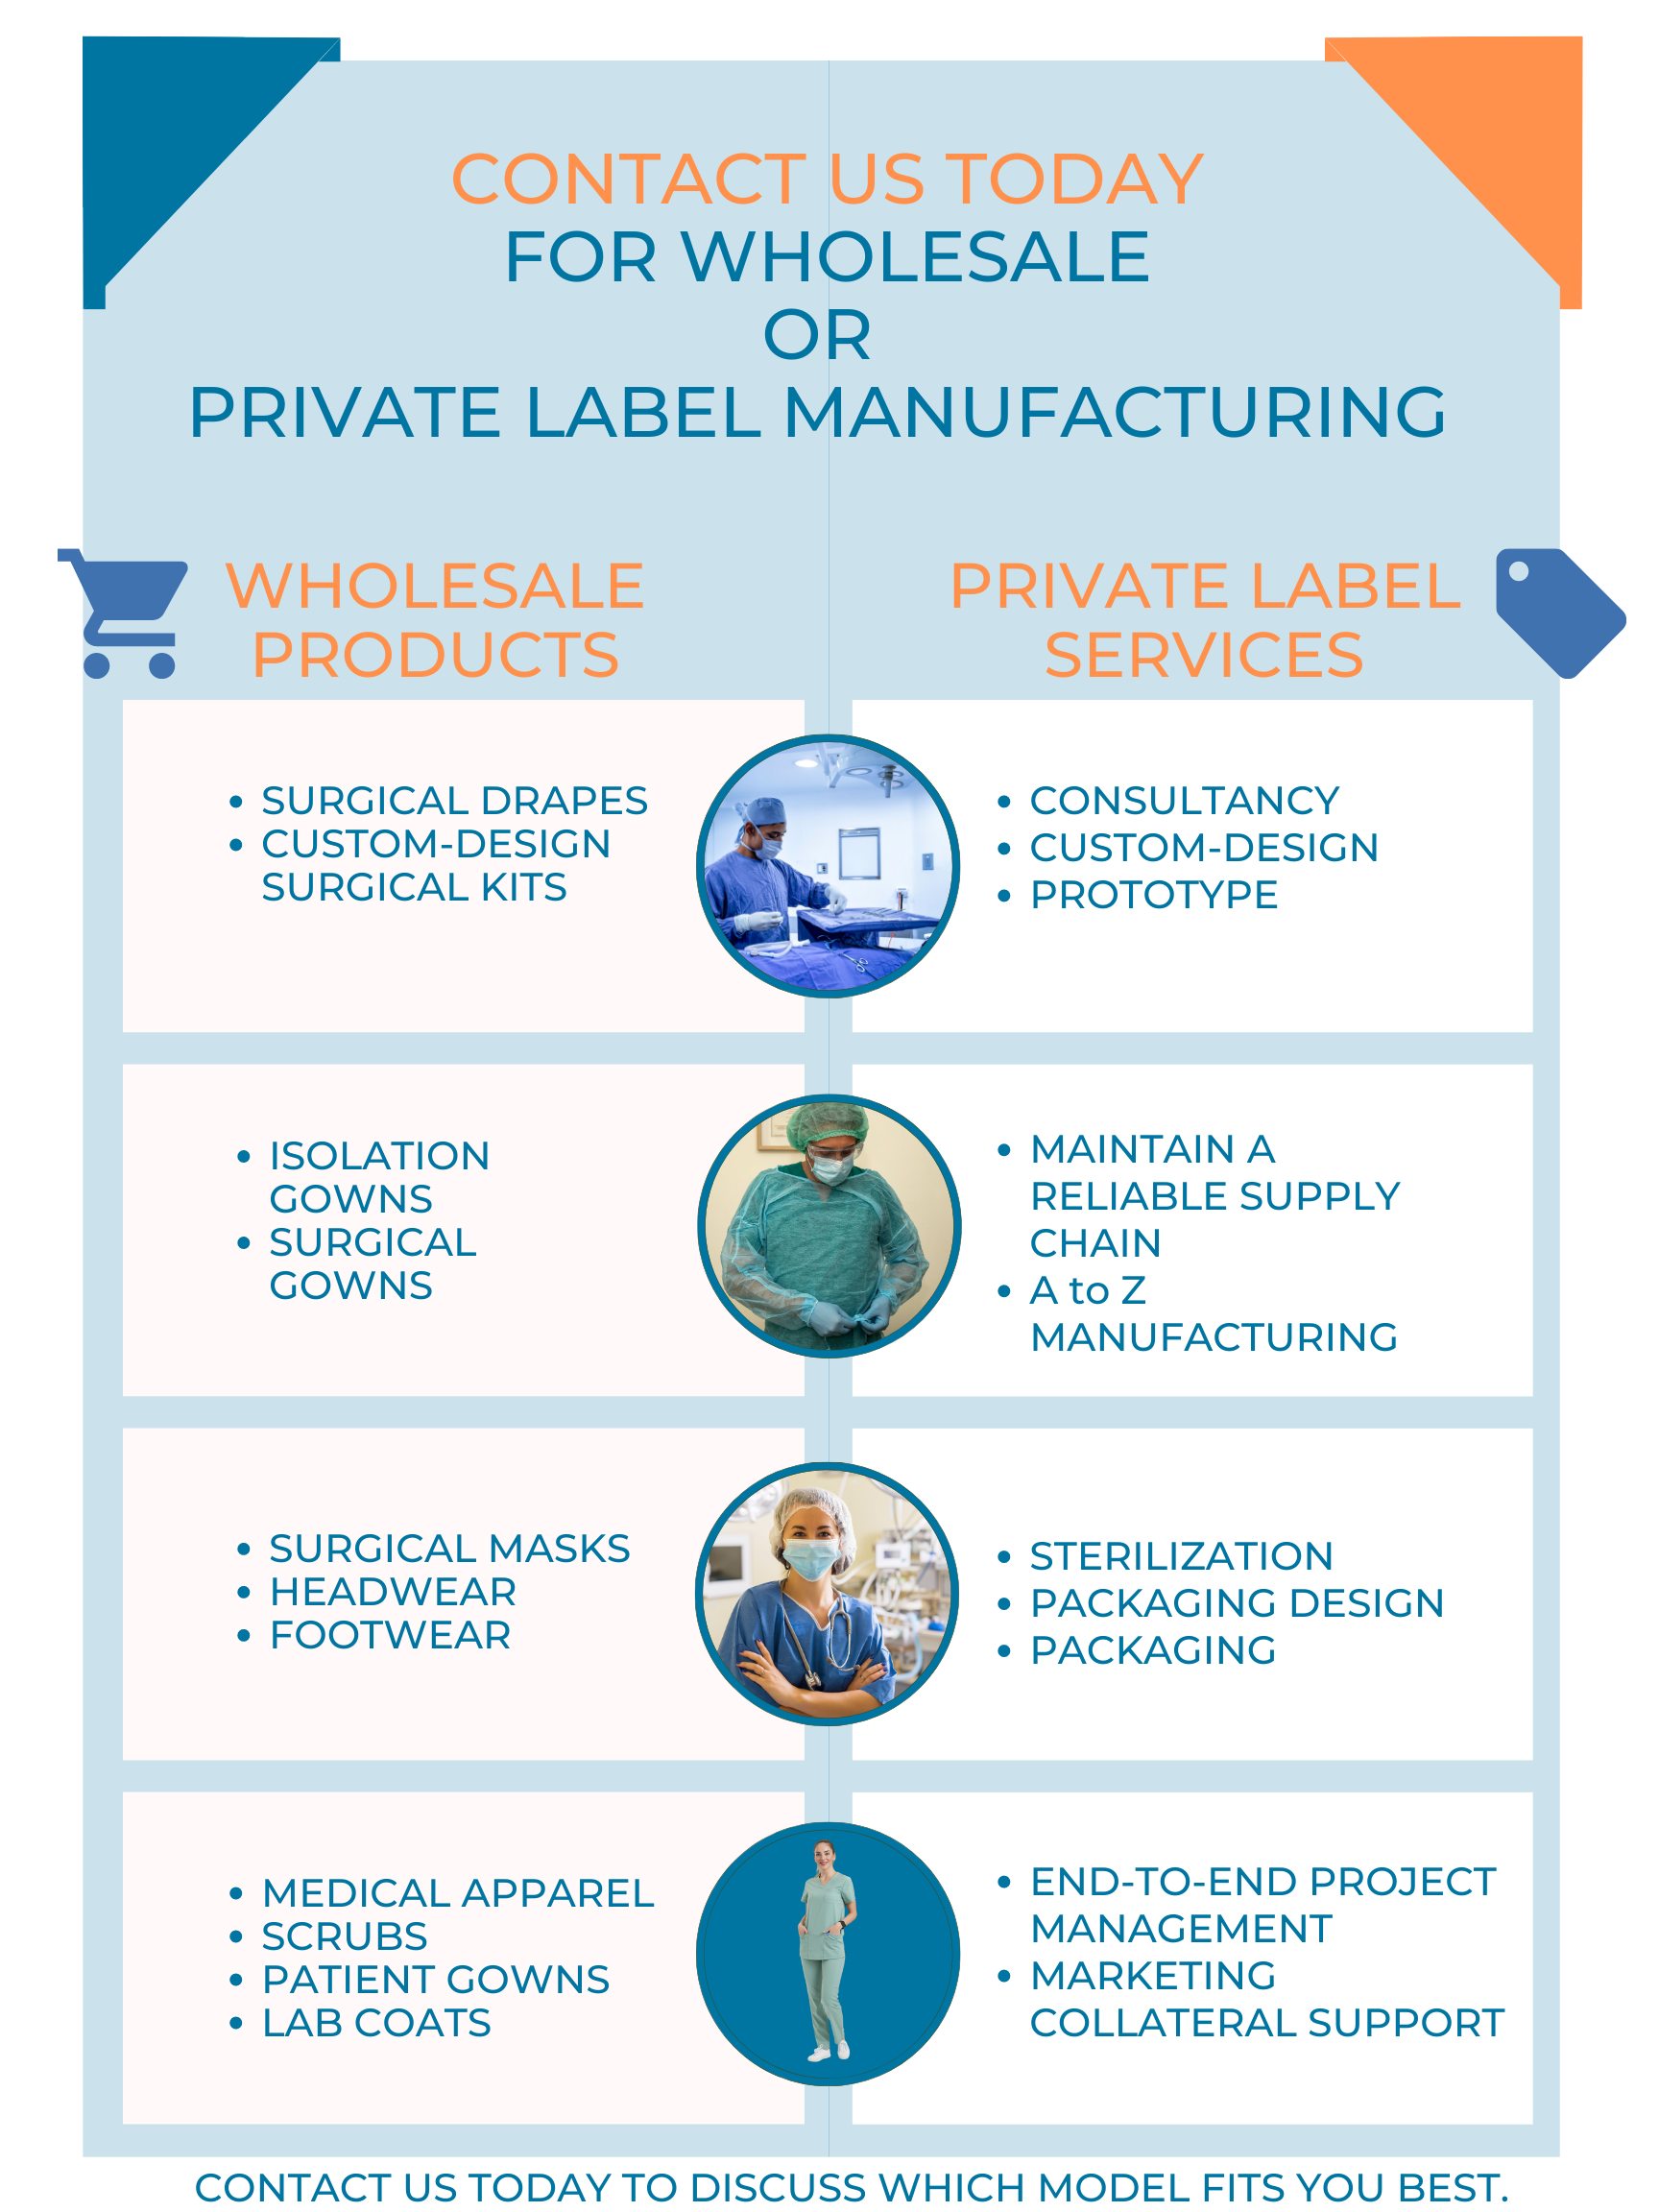 Contact Proteq Medical to discuss the best model that fits your business, either wholesale or private label. 